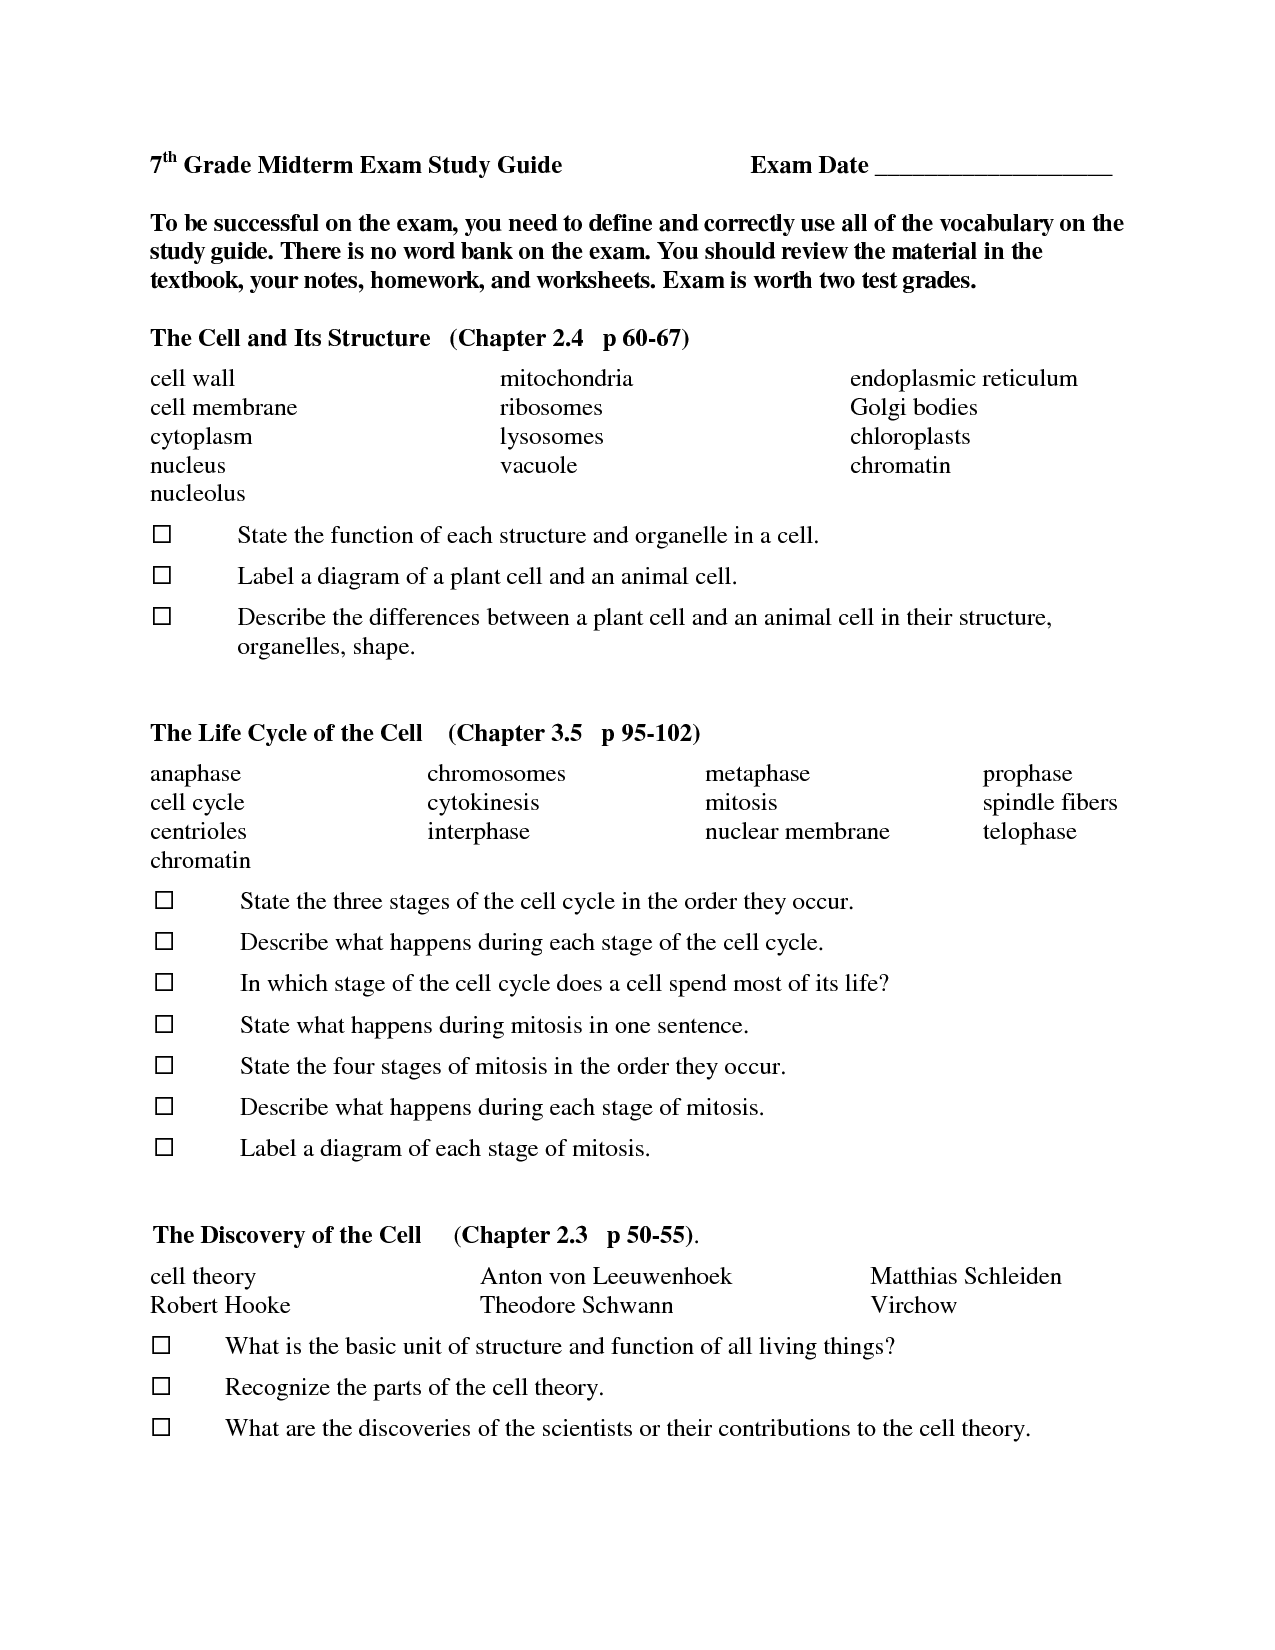 19-best-images-of-cells-worksheets-grade-7-plant-and-animal-cell